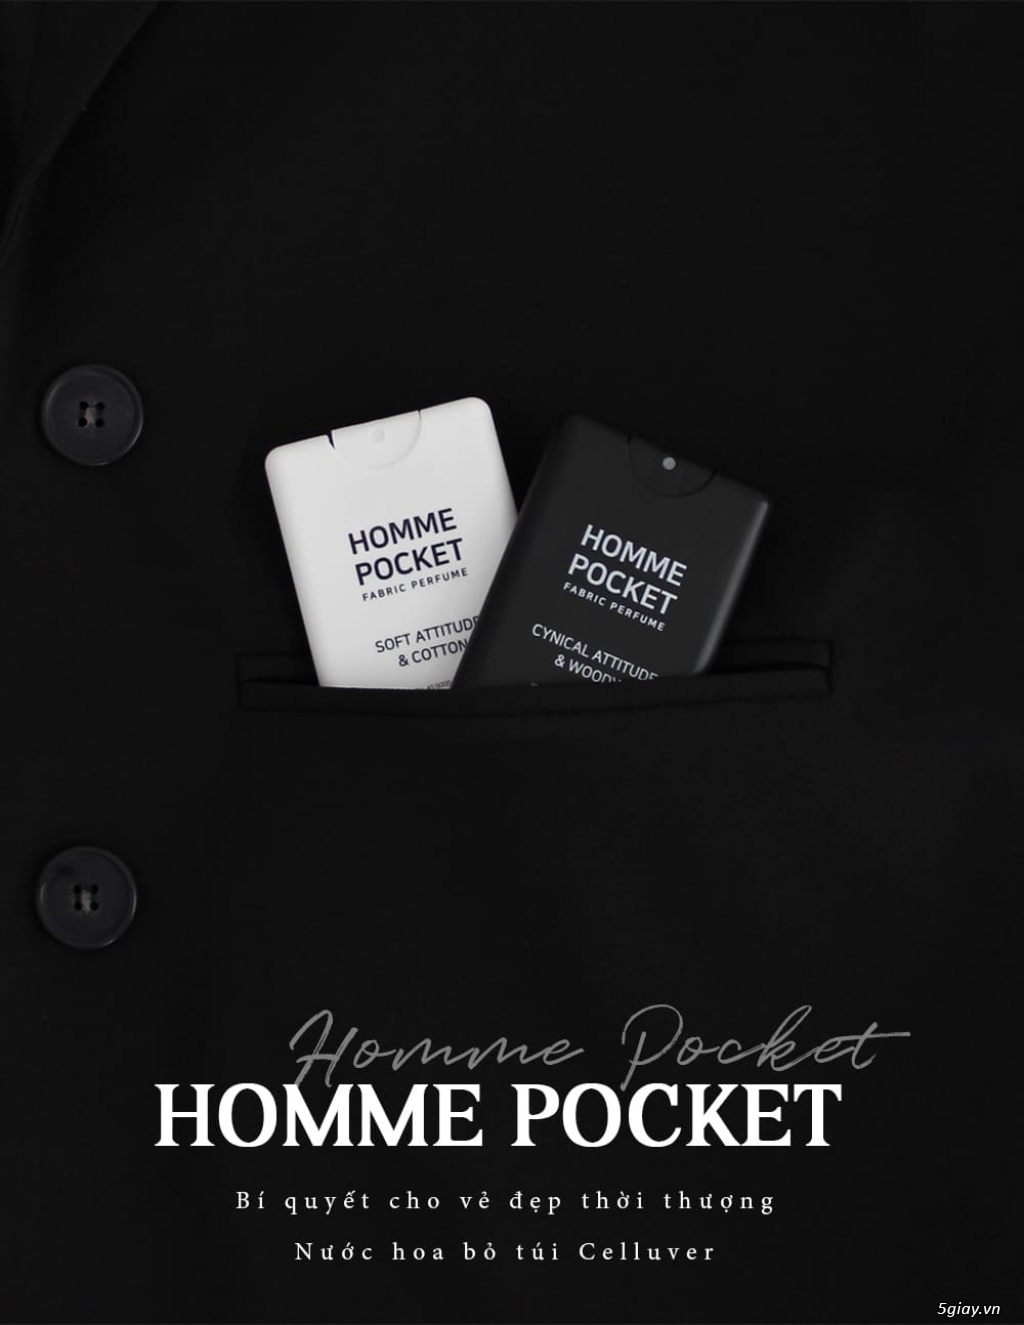 CELLUVER HOMME POCKET CYNICAL ATTITUDE & WOODY 20ML - 11